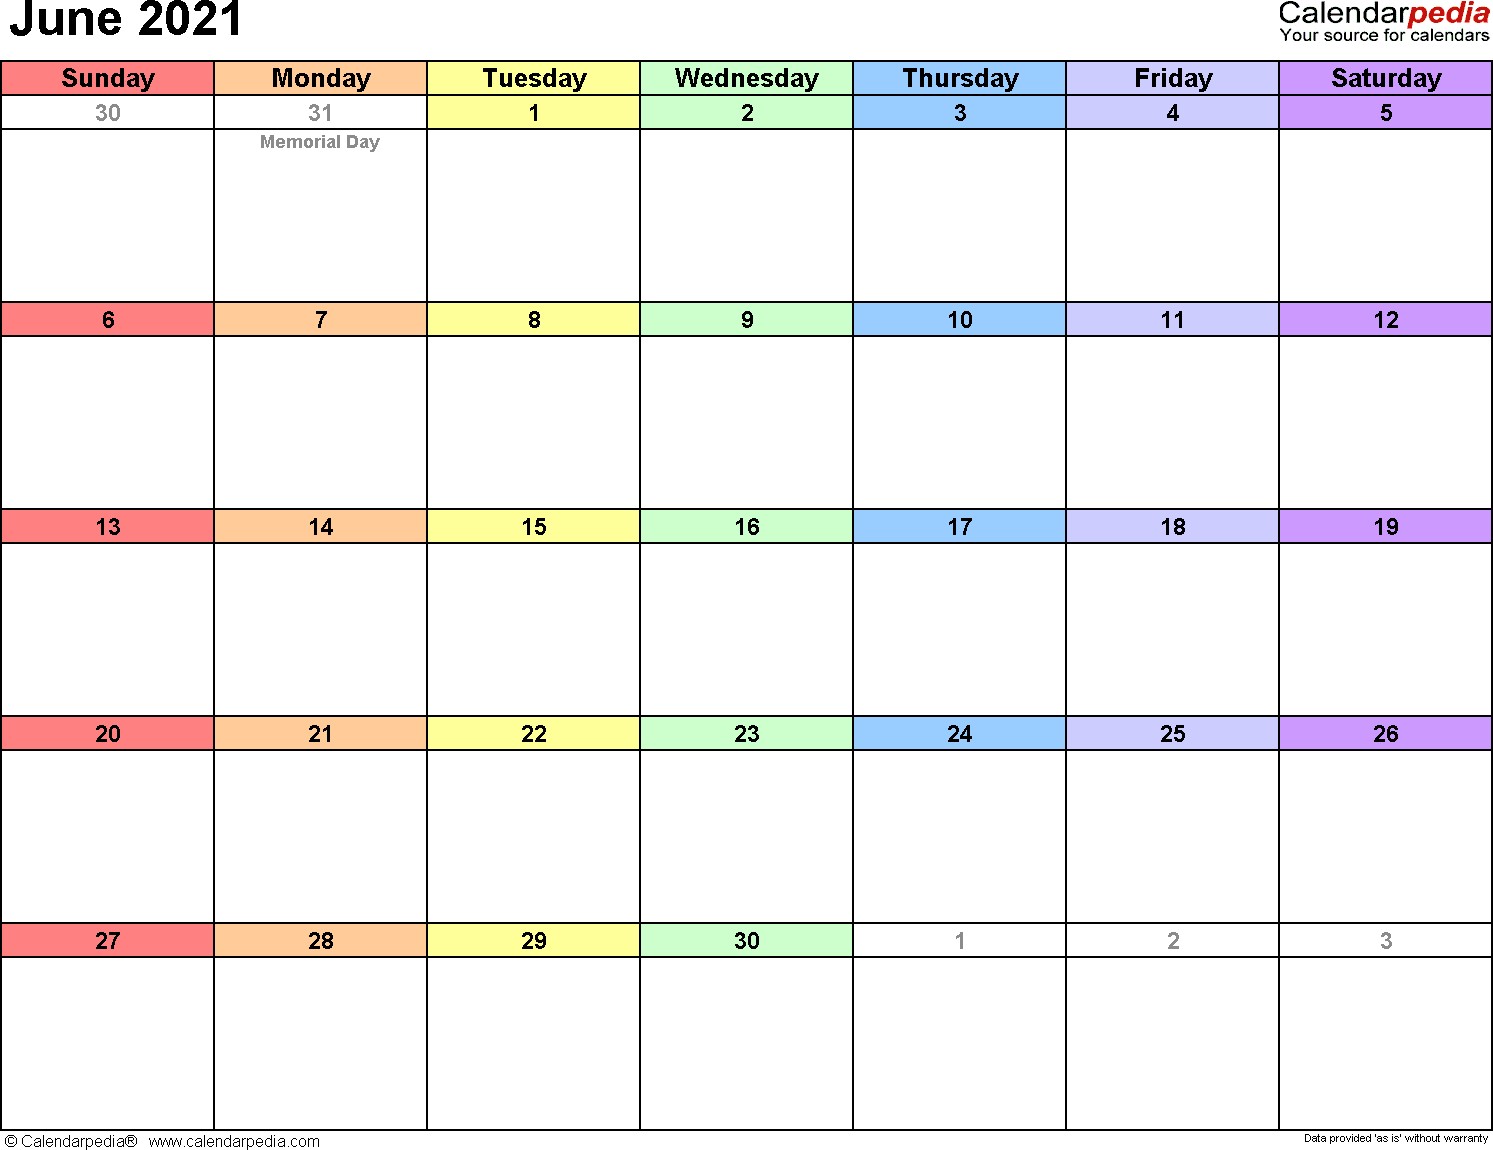 June 2021 calendar templates for Word Excel and PDF